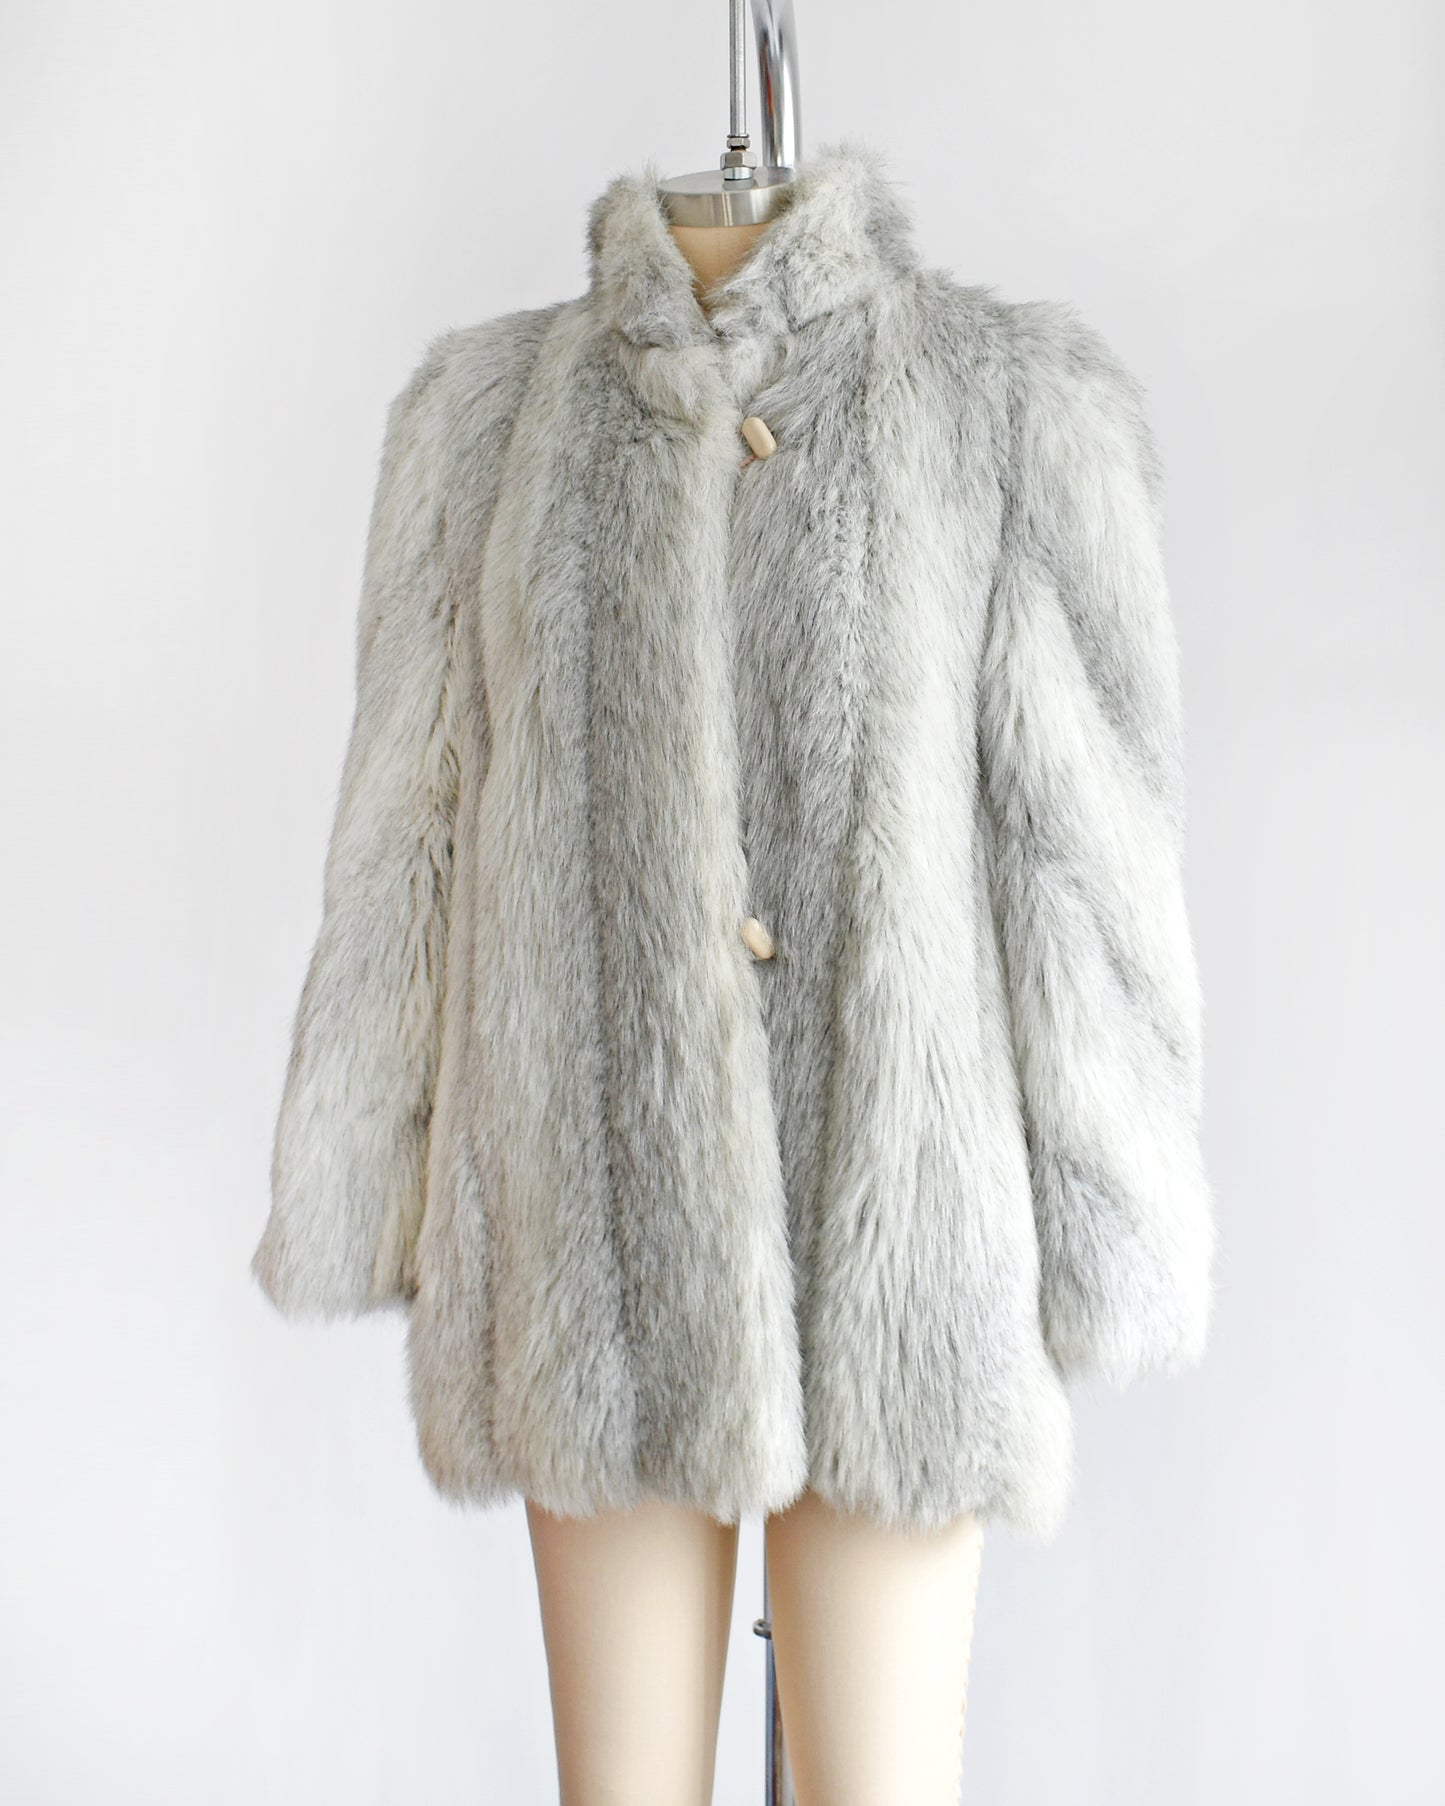 Side front view of a vintage 1980s faux fur coat that features a plush white faux fur with light and dark gray stripes, a high collar, and structured puffed shoulders.